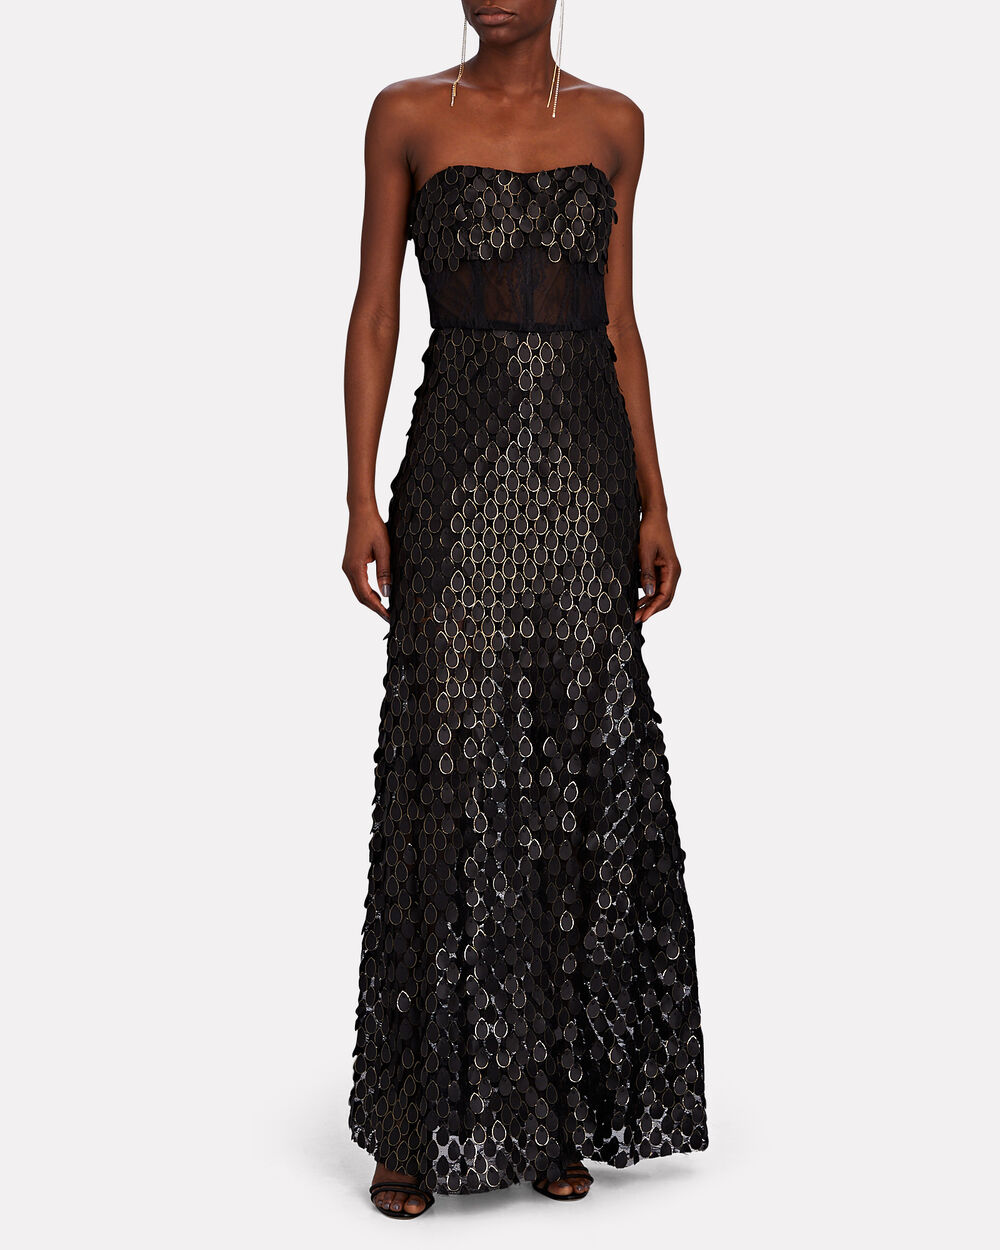 MANNING CARTELL Supreme Extreme Gown In Black